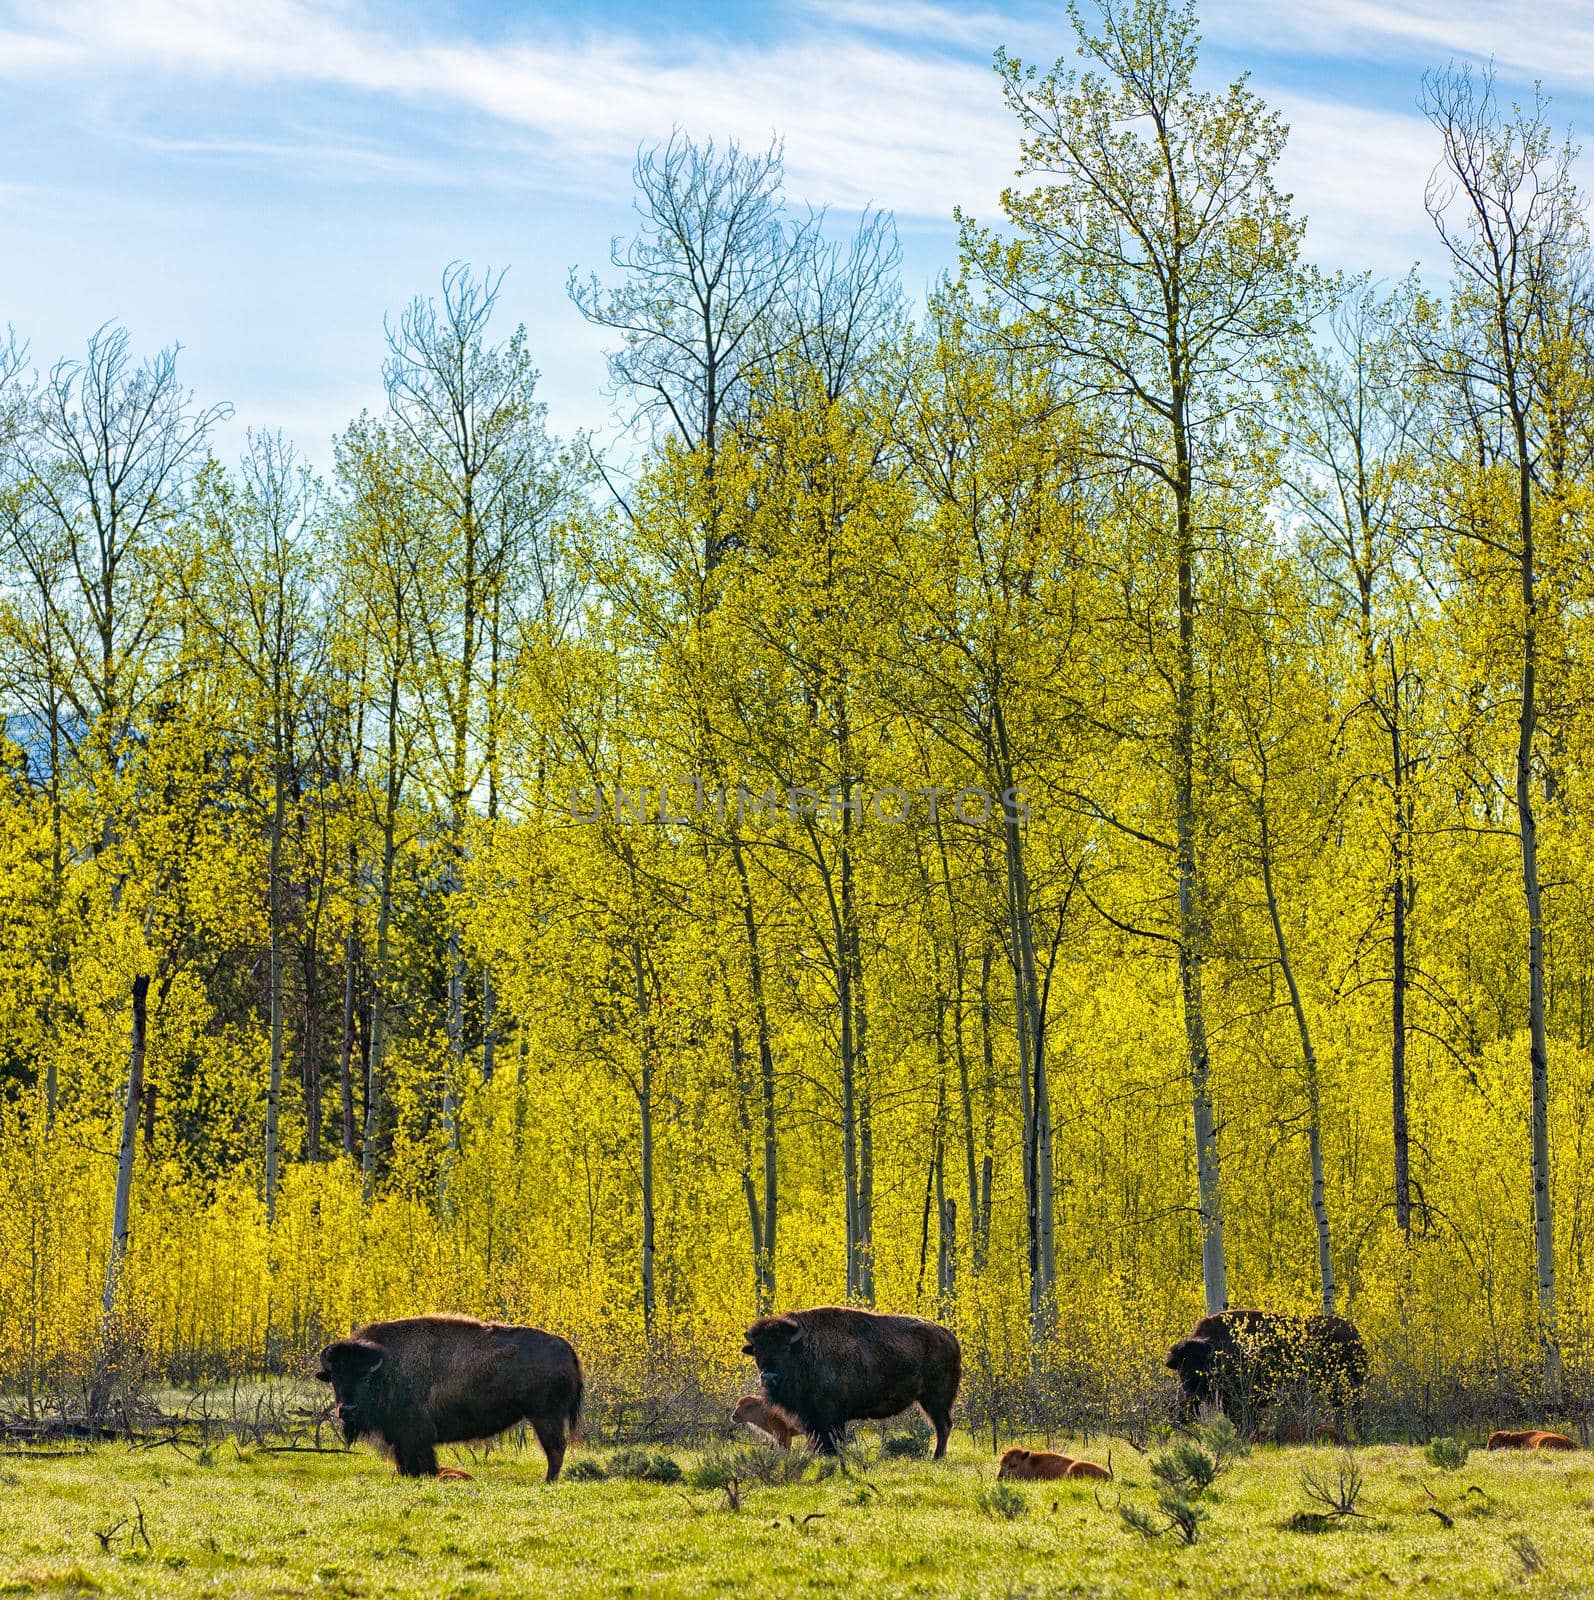 Three buffalo in the forest, Image of Three buffalo in the grass by isaiphoto